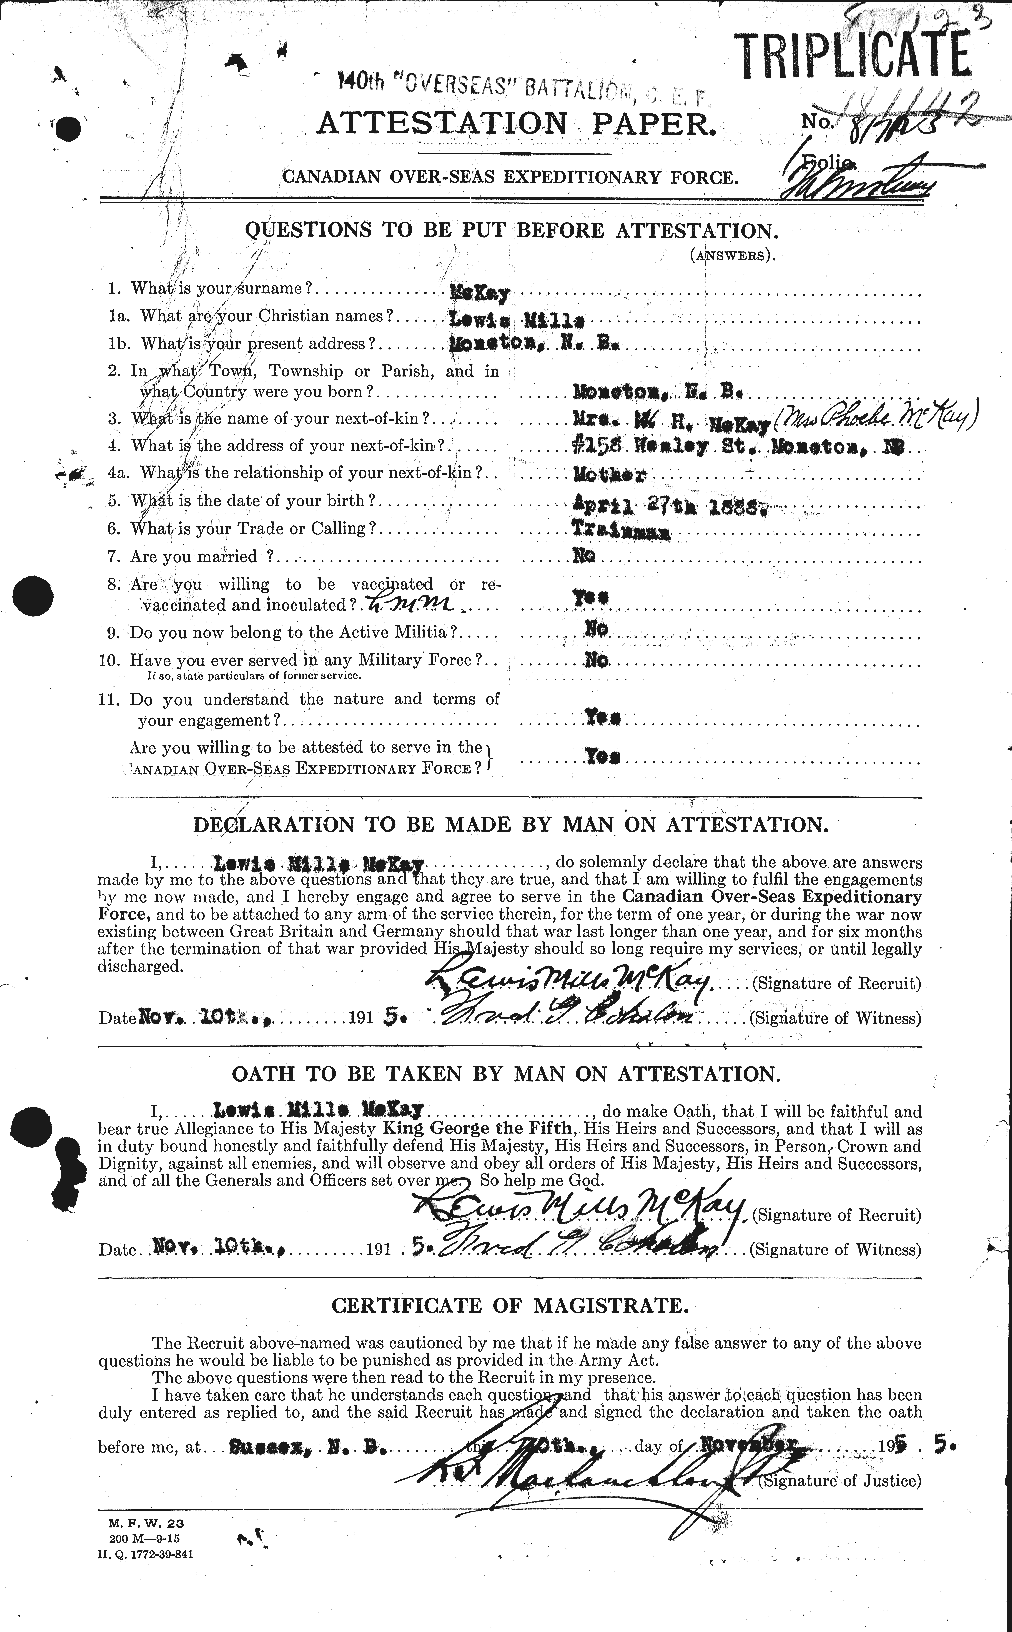 Personnel Records of the First World War - CEF 527151a